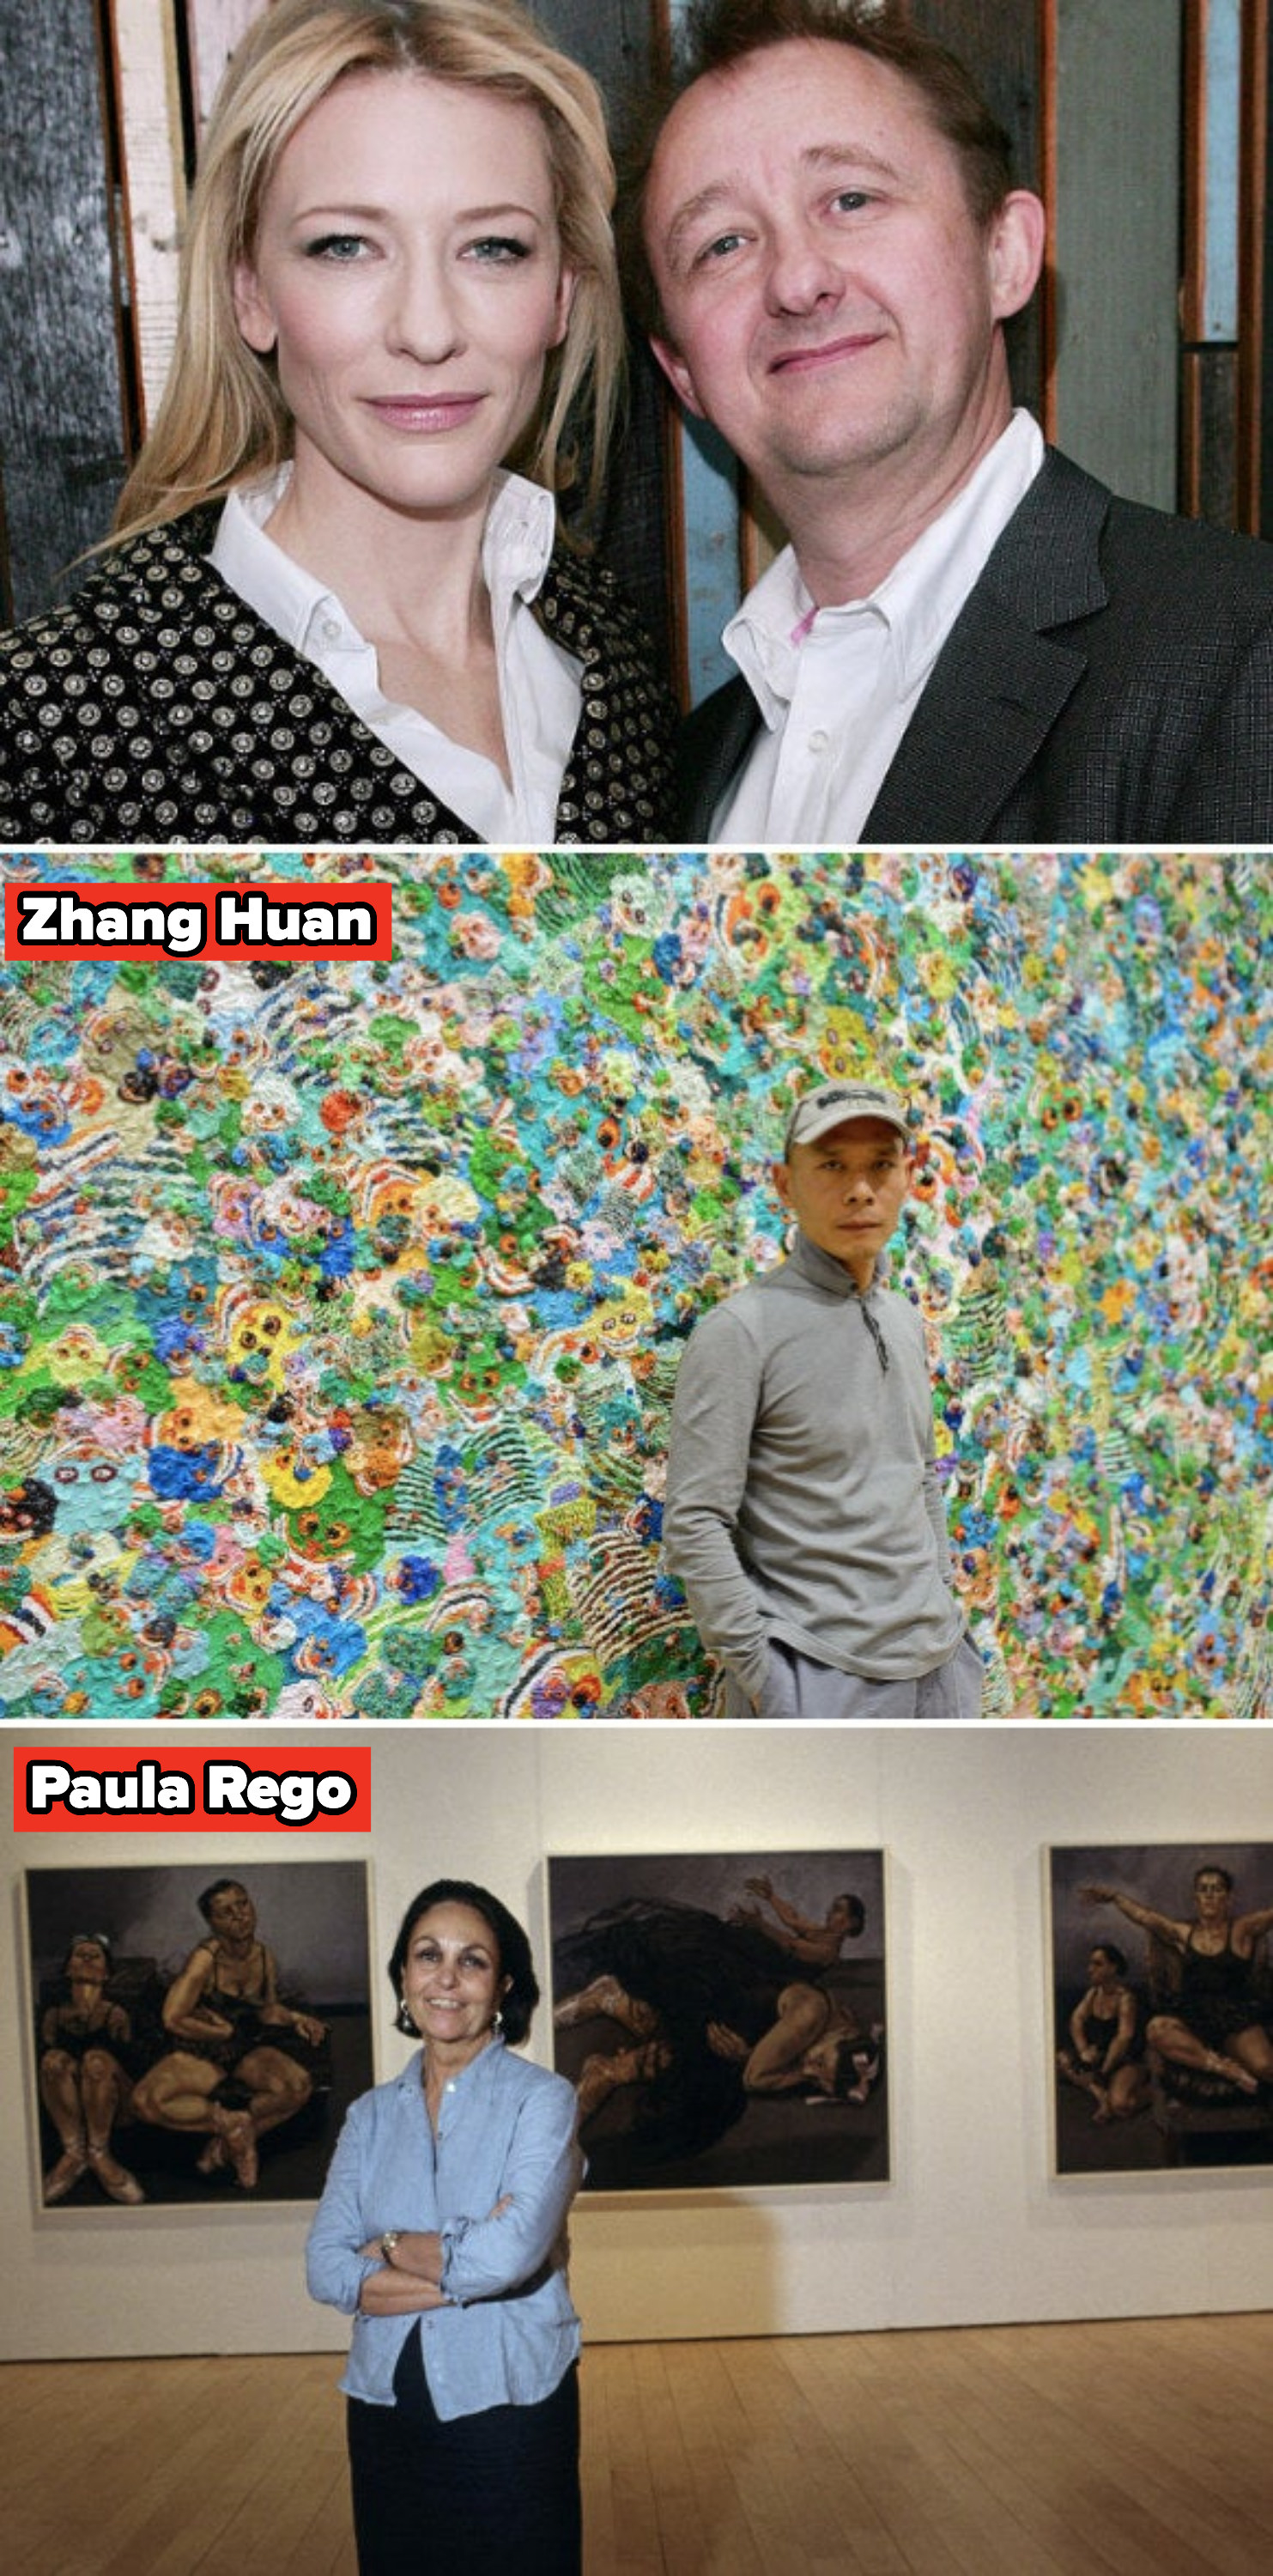 Blanchett and her husband in Australia in 2009; Huan at one of his exhibits in London in 2014; Rego in front of one of her paintings in 1996